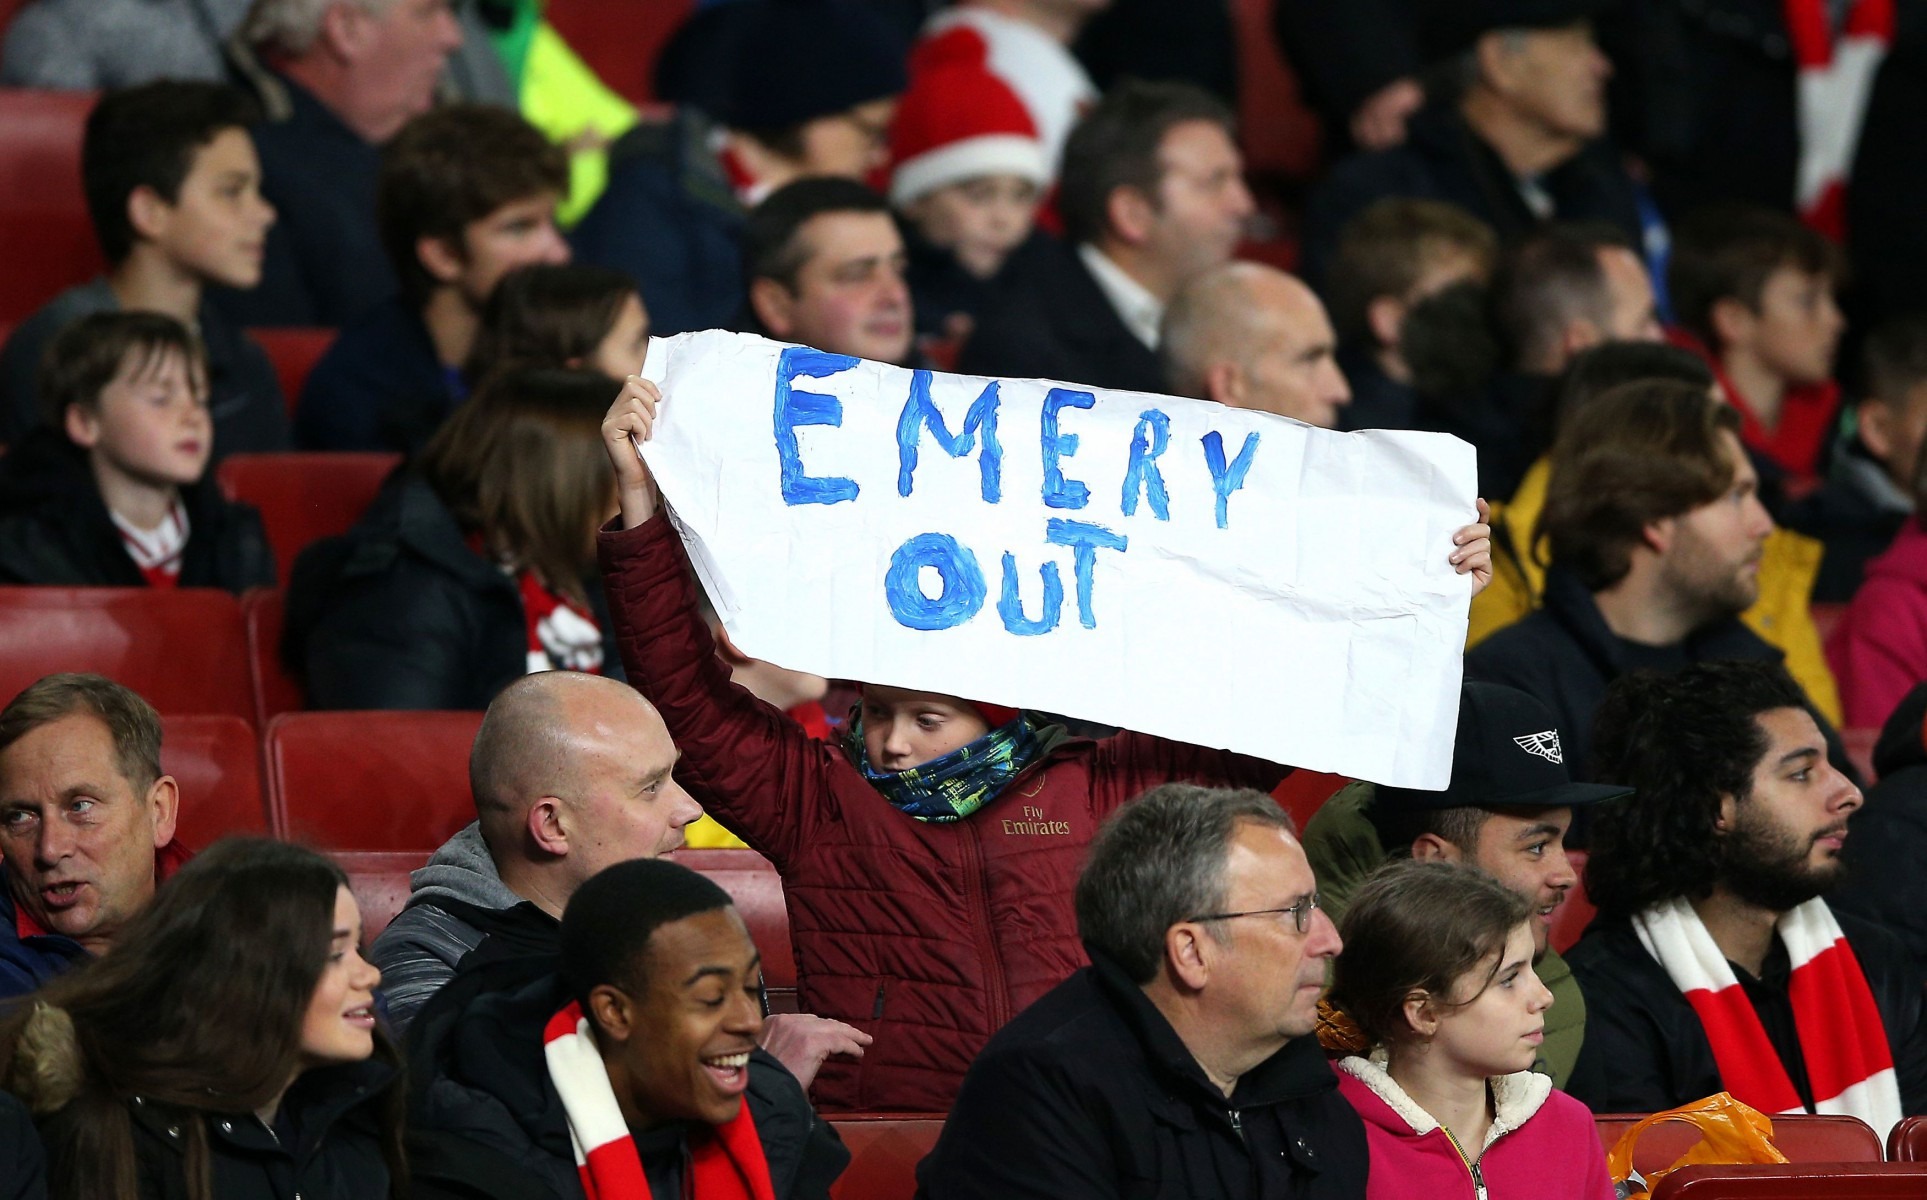 One supporter held up a sign calling for 'Emery Out' as the Gunners struggled again